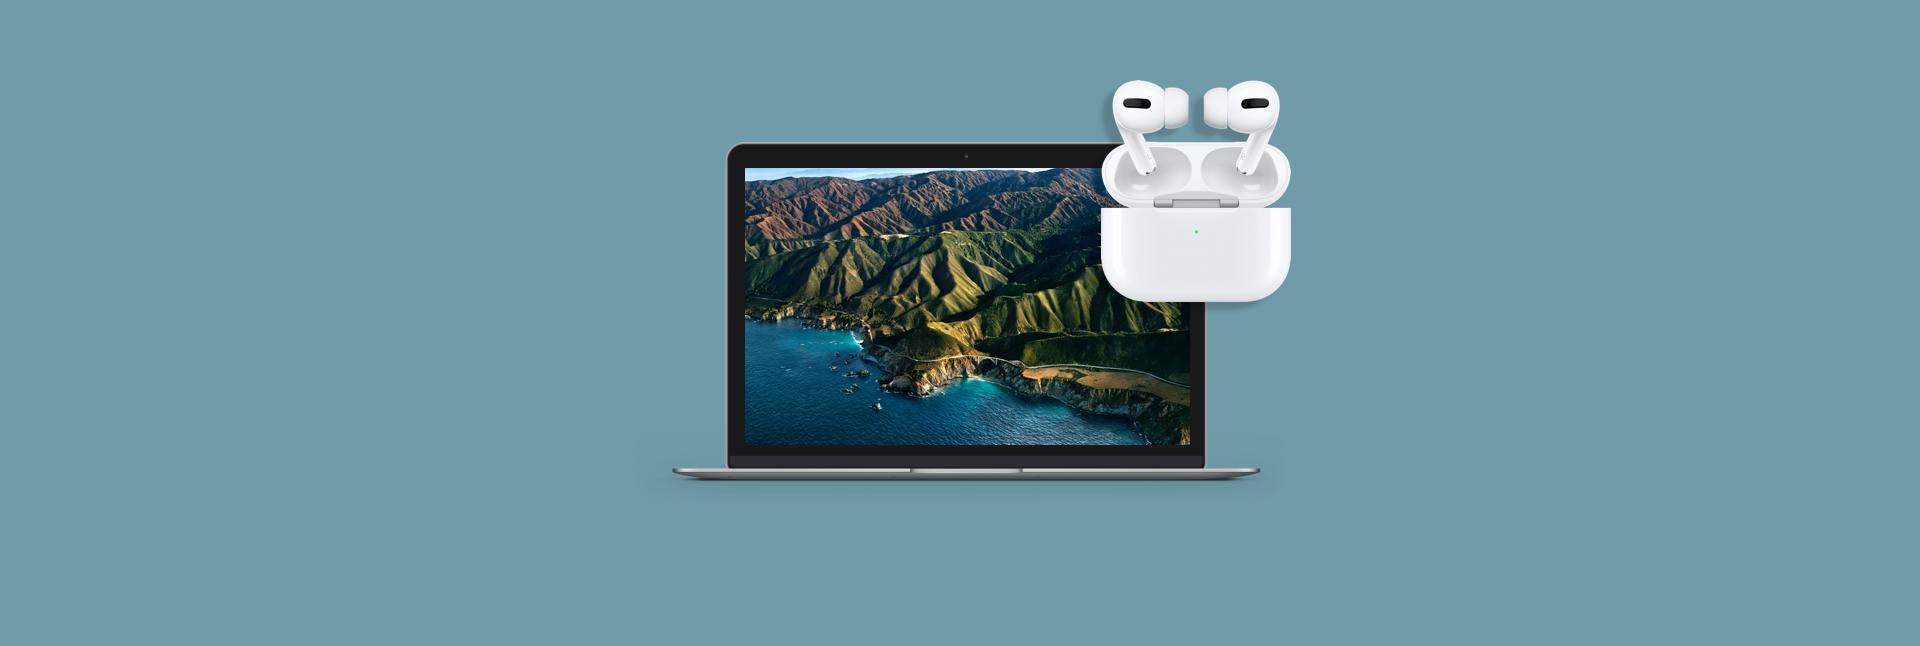 pair AirPods and AirPods Pro with MacBook, or Andoiod